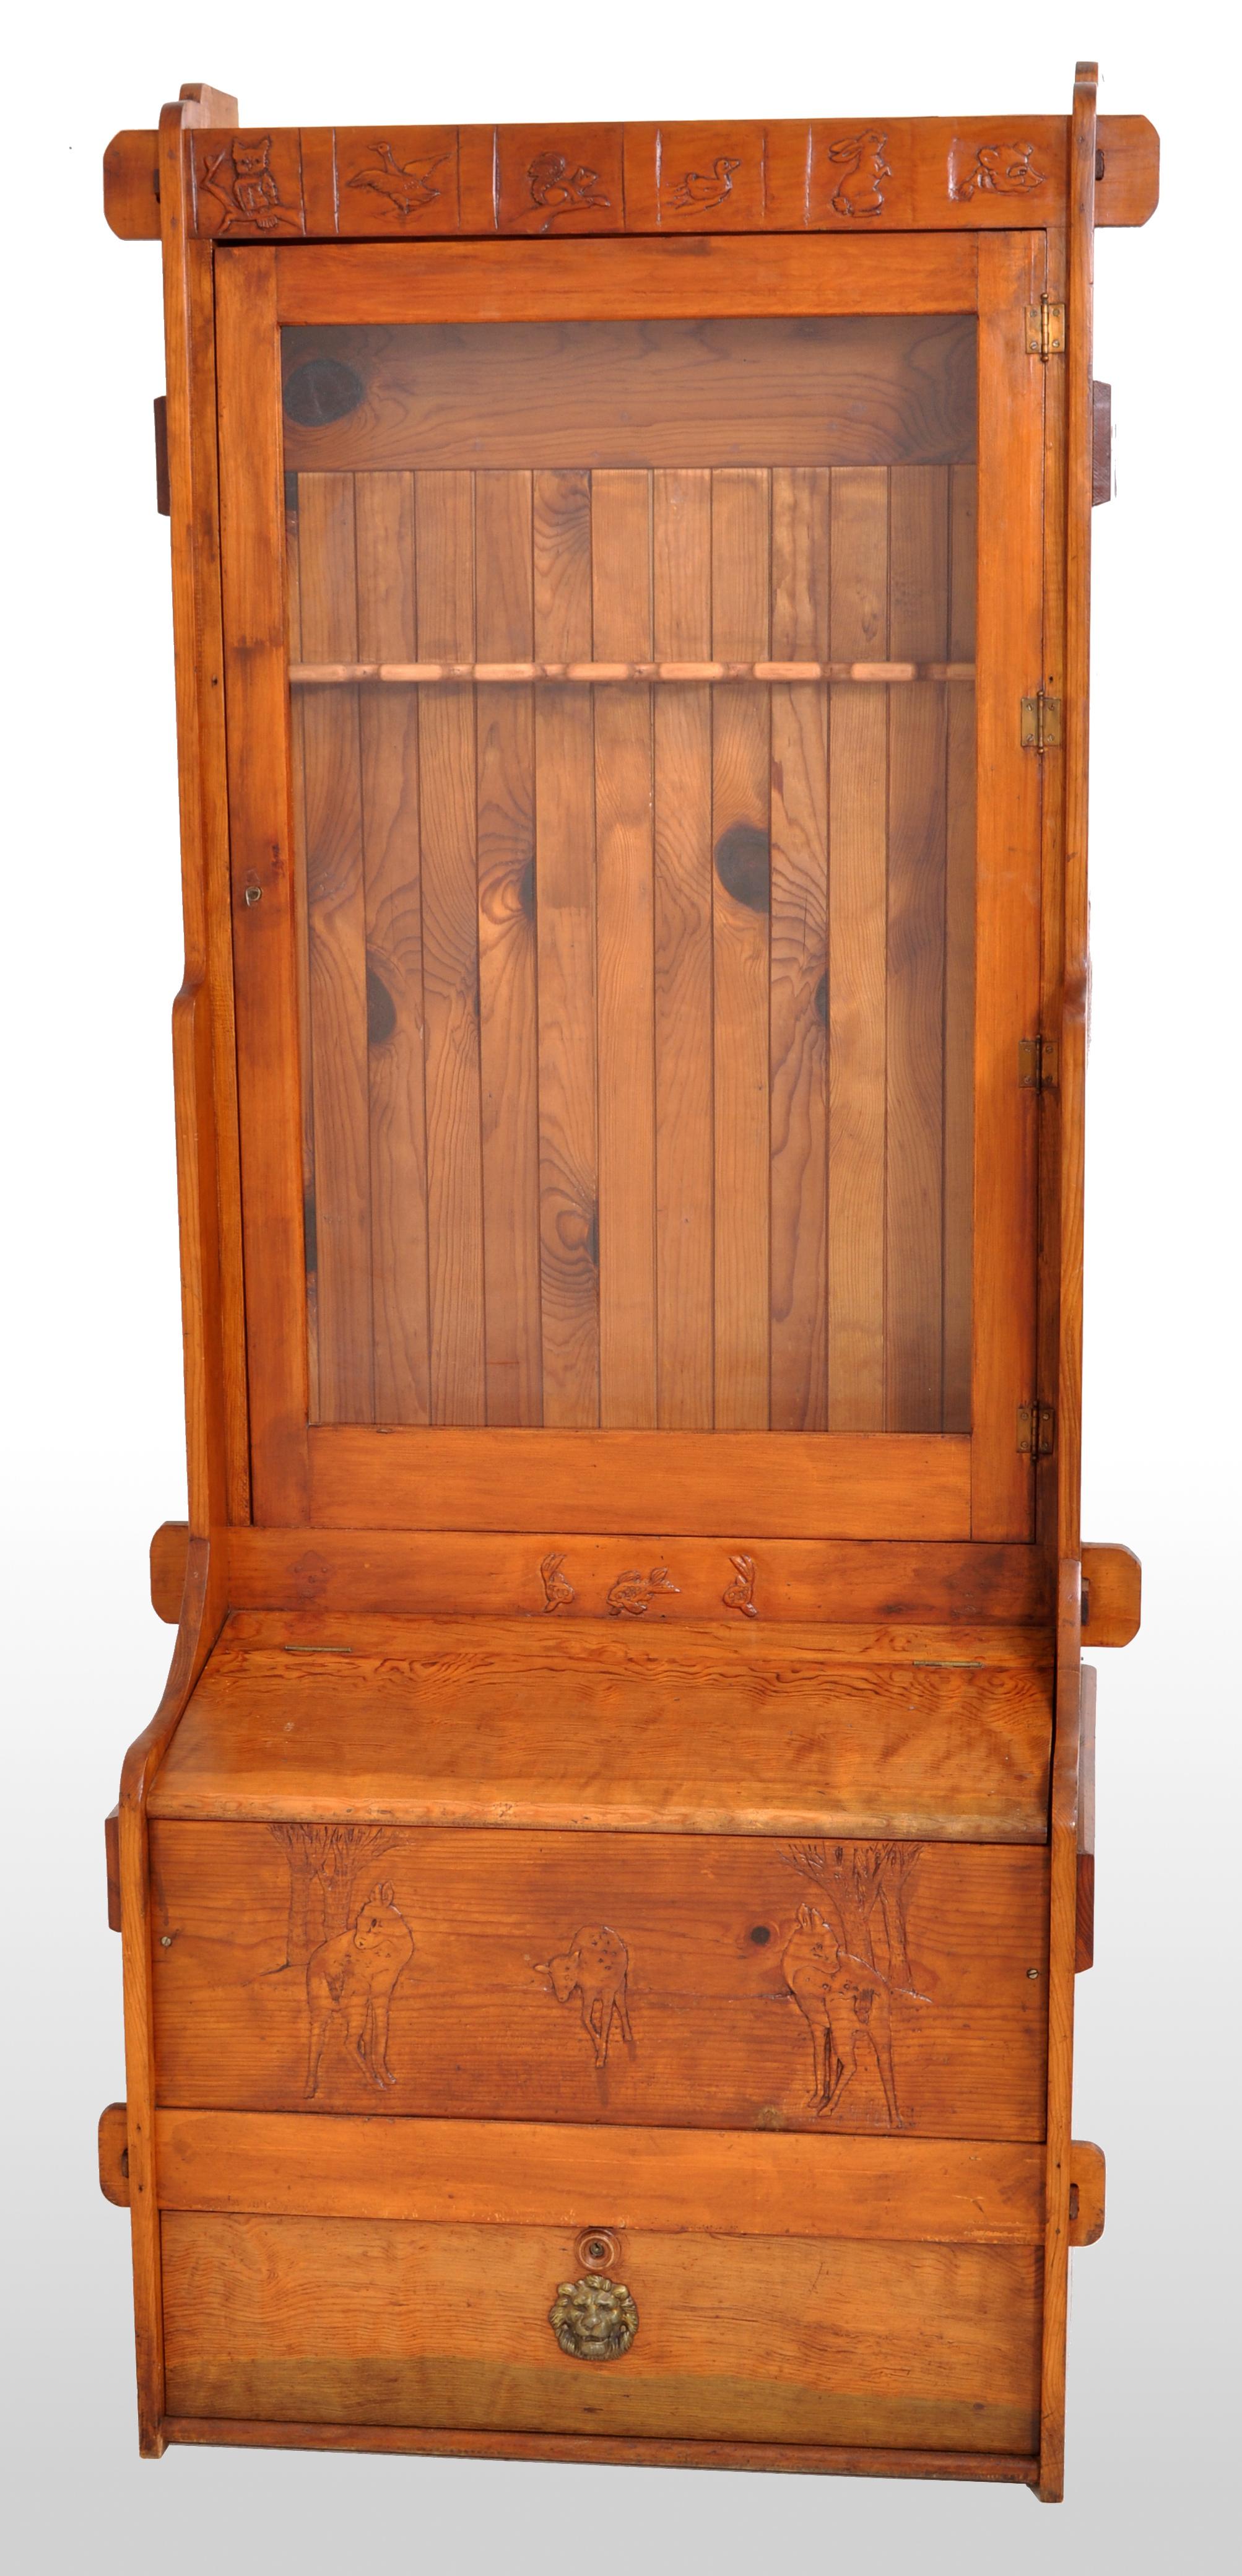 An unusual antique 'American Country' gun/rifle display cabinet, circa 1920. The cabinet made from knotty pine and having a single locking door with a glazed panel which encloses a rack for nine guns, above is a through mortise and tenon panel